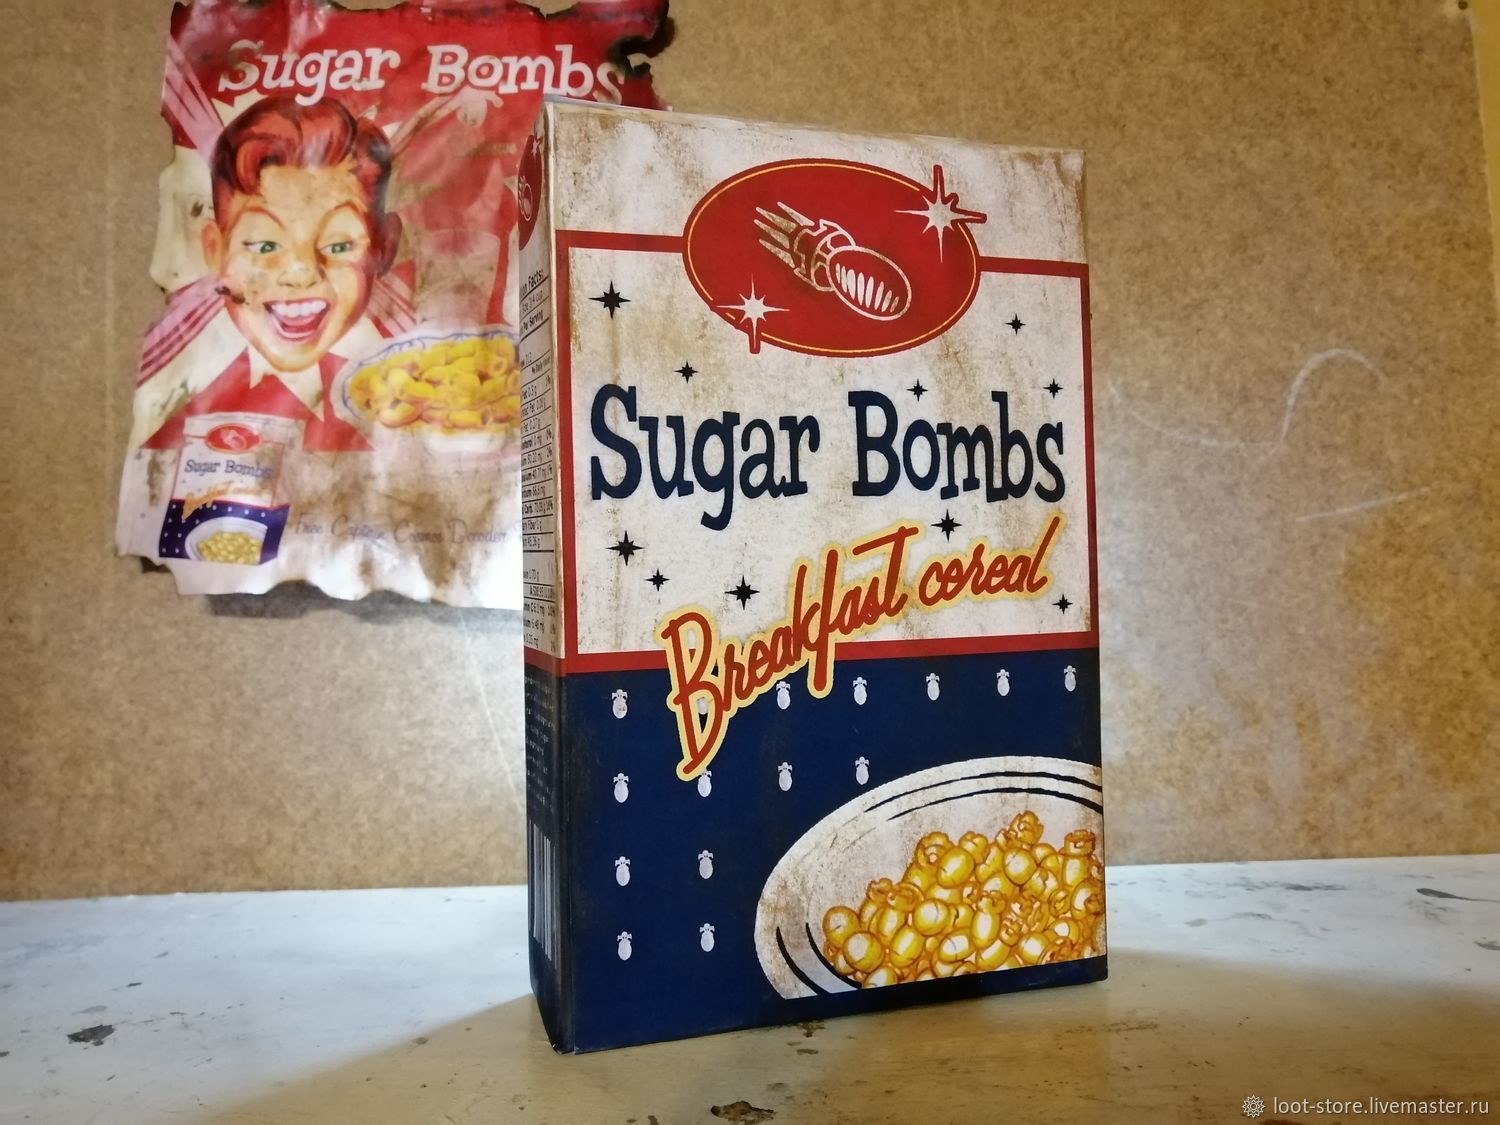 Sugar bombs fallout. Сахарные бомбы фоллаут. Сахарные бомбочки. Фоллаут Sugar Bombs. Sugar Bombs Cereal.